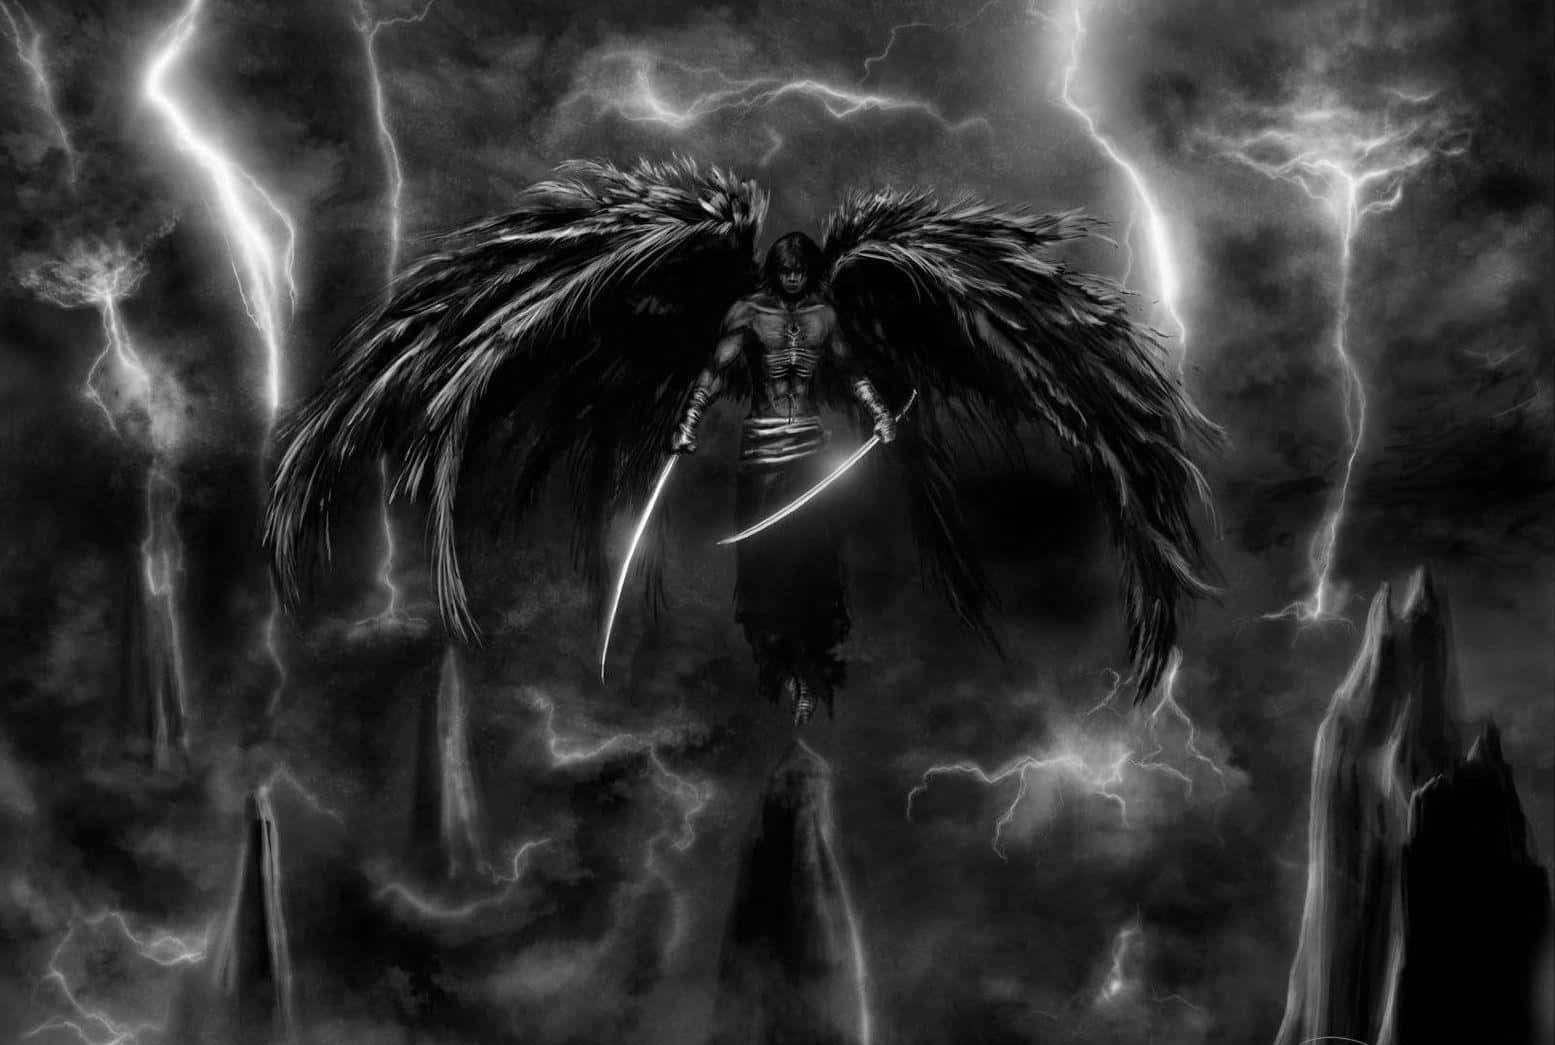 A Black And White Image Of An Angel With Wings Flying Over A Storm